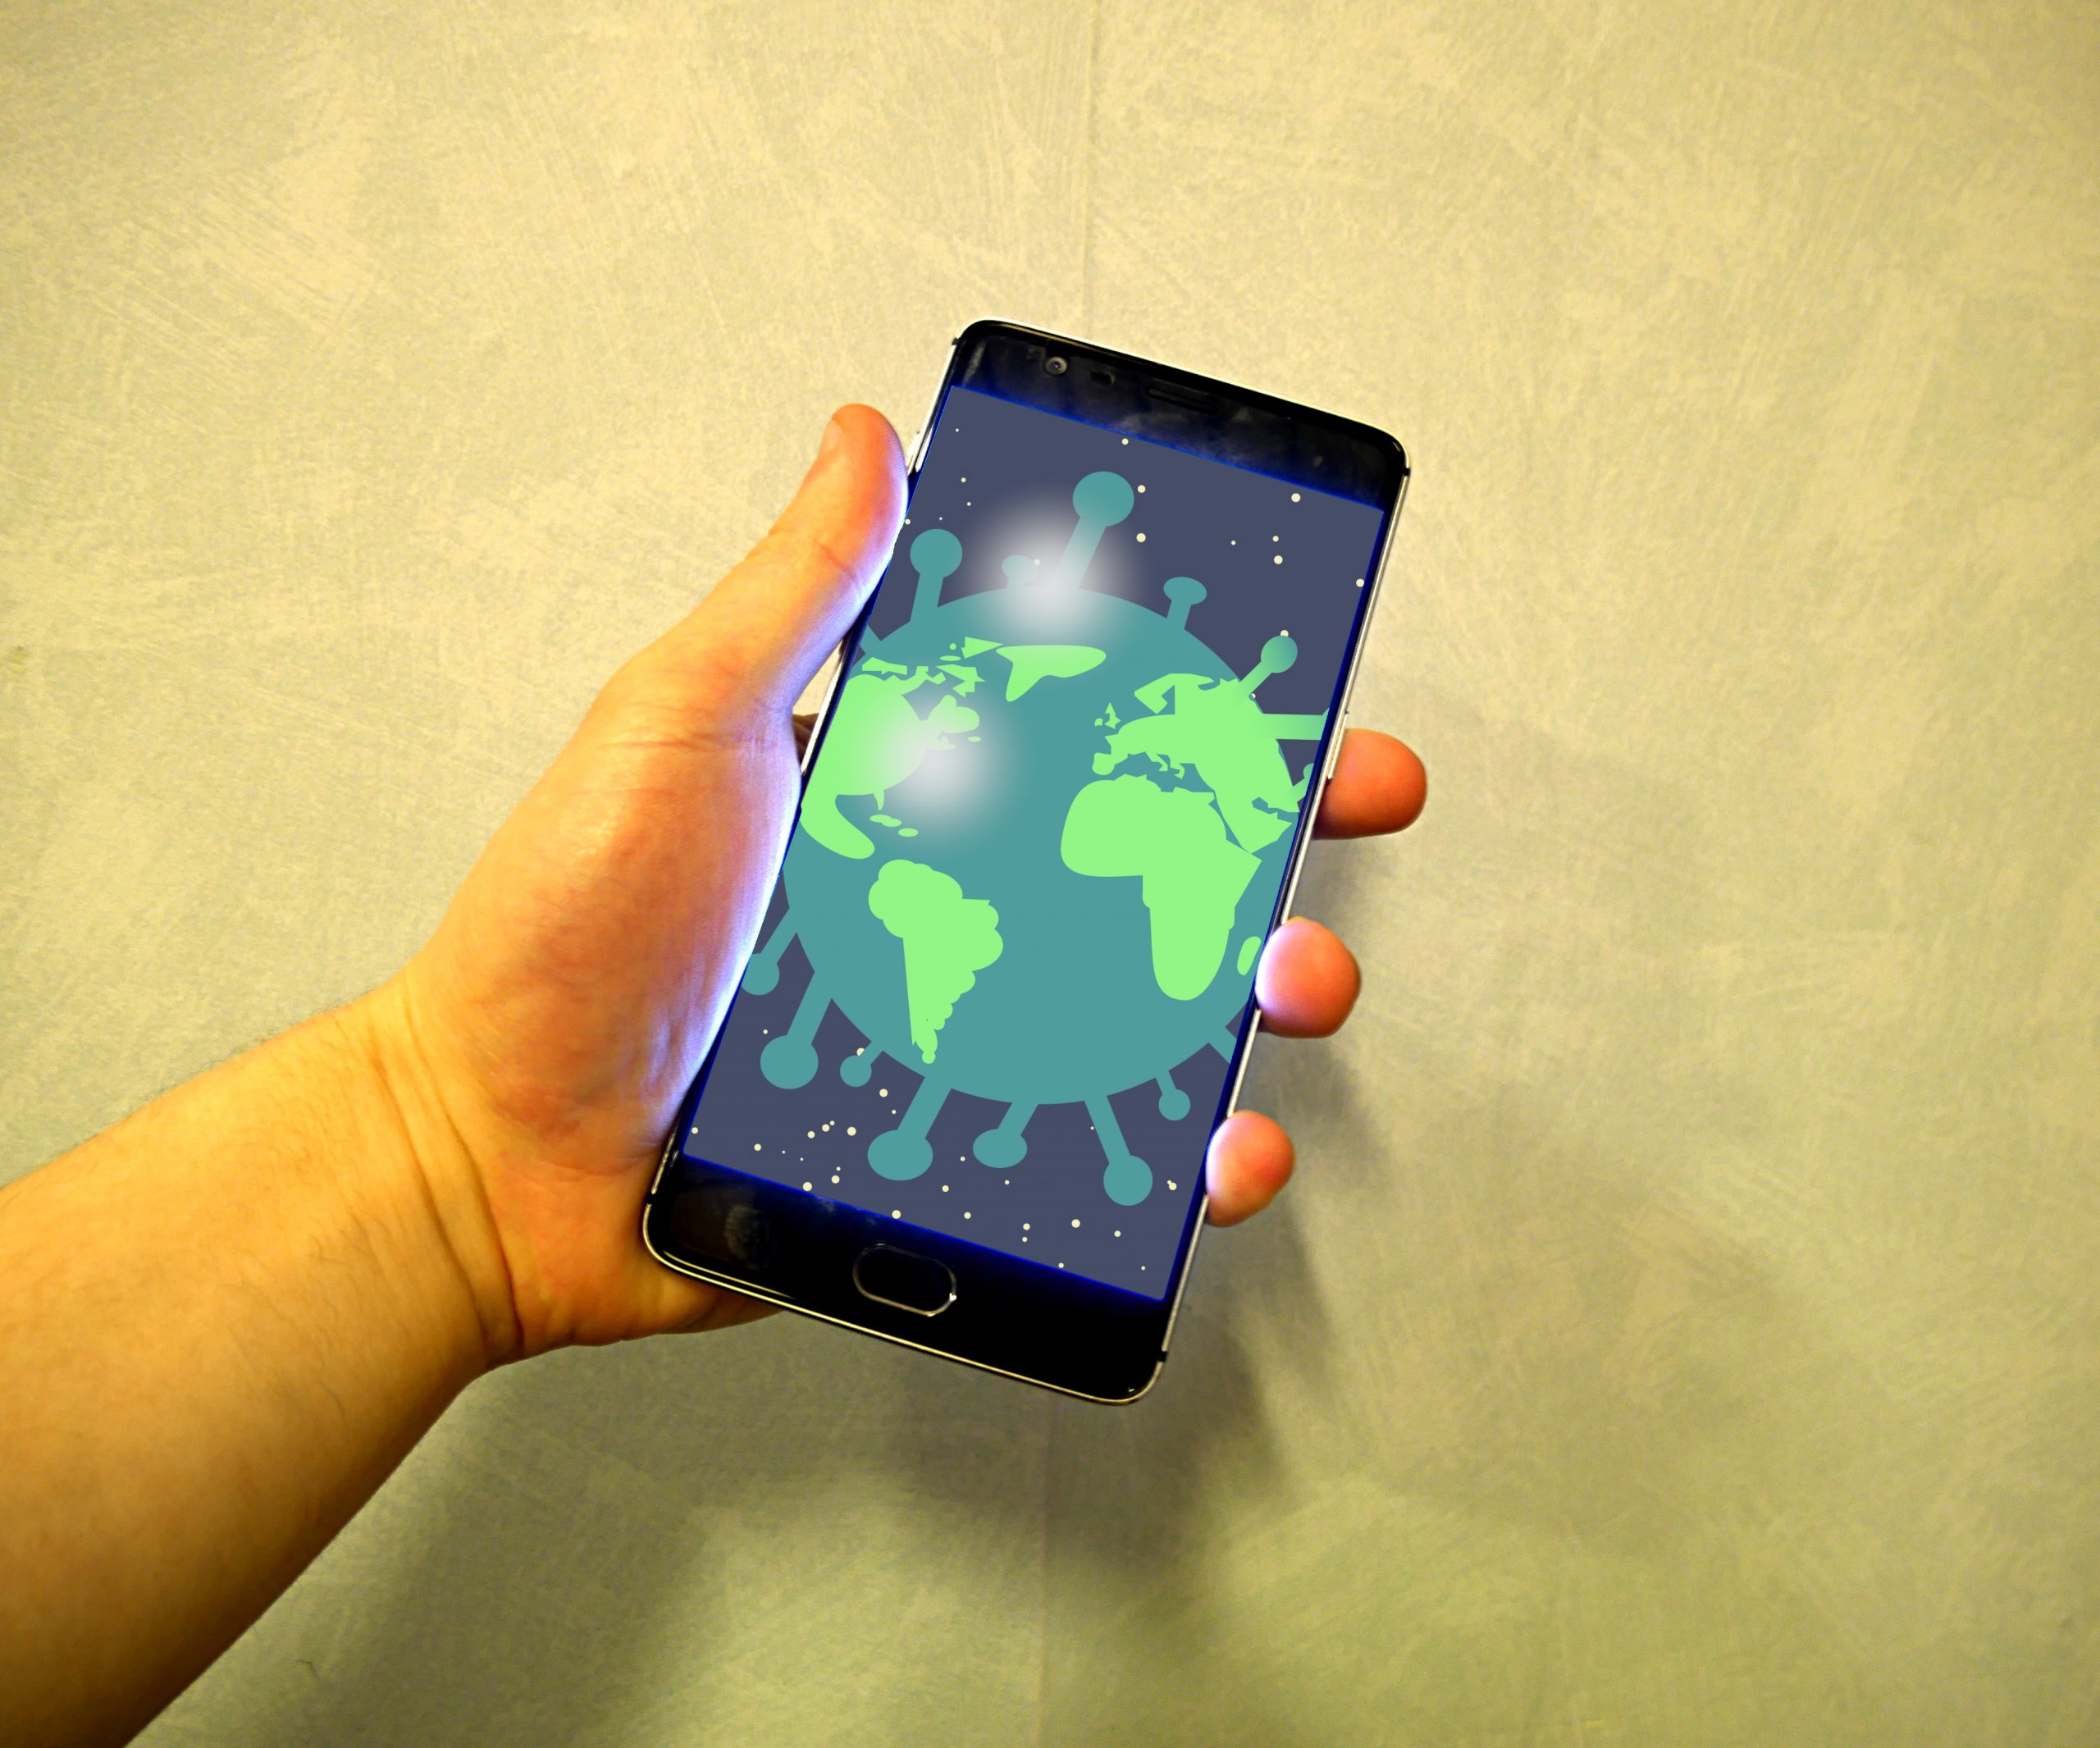 A hand holding a smartphone. The phone is showing a cartoon of the earth that has spikes like the COVID-19 virus.